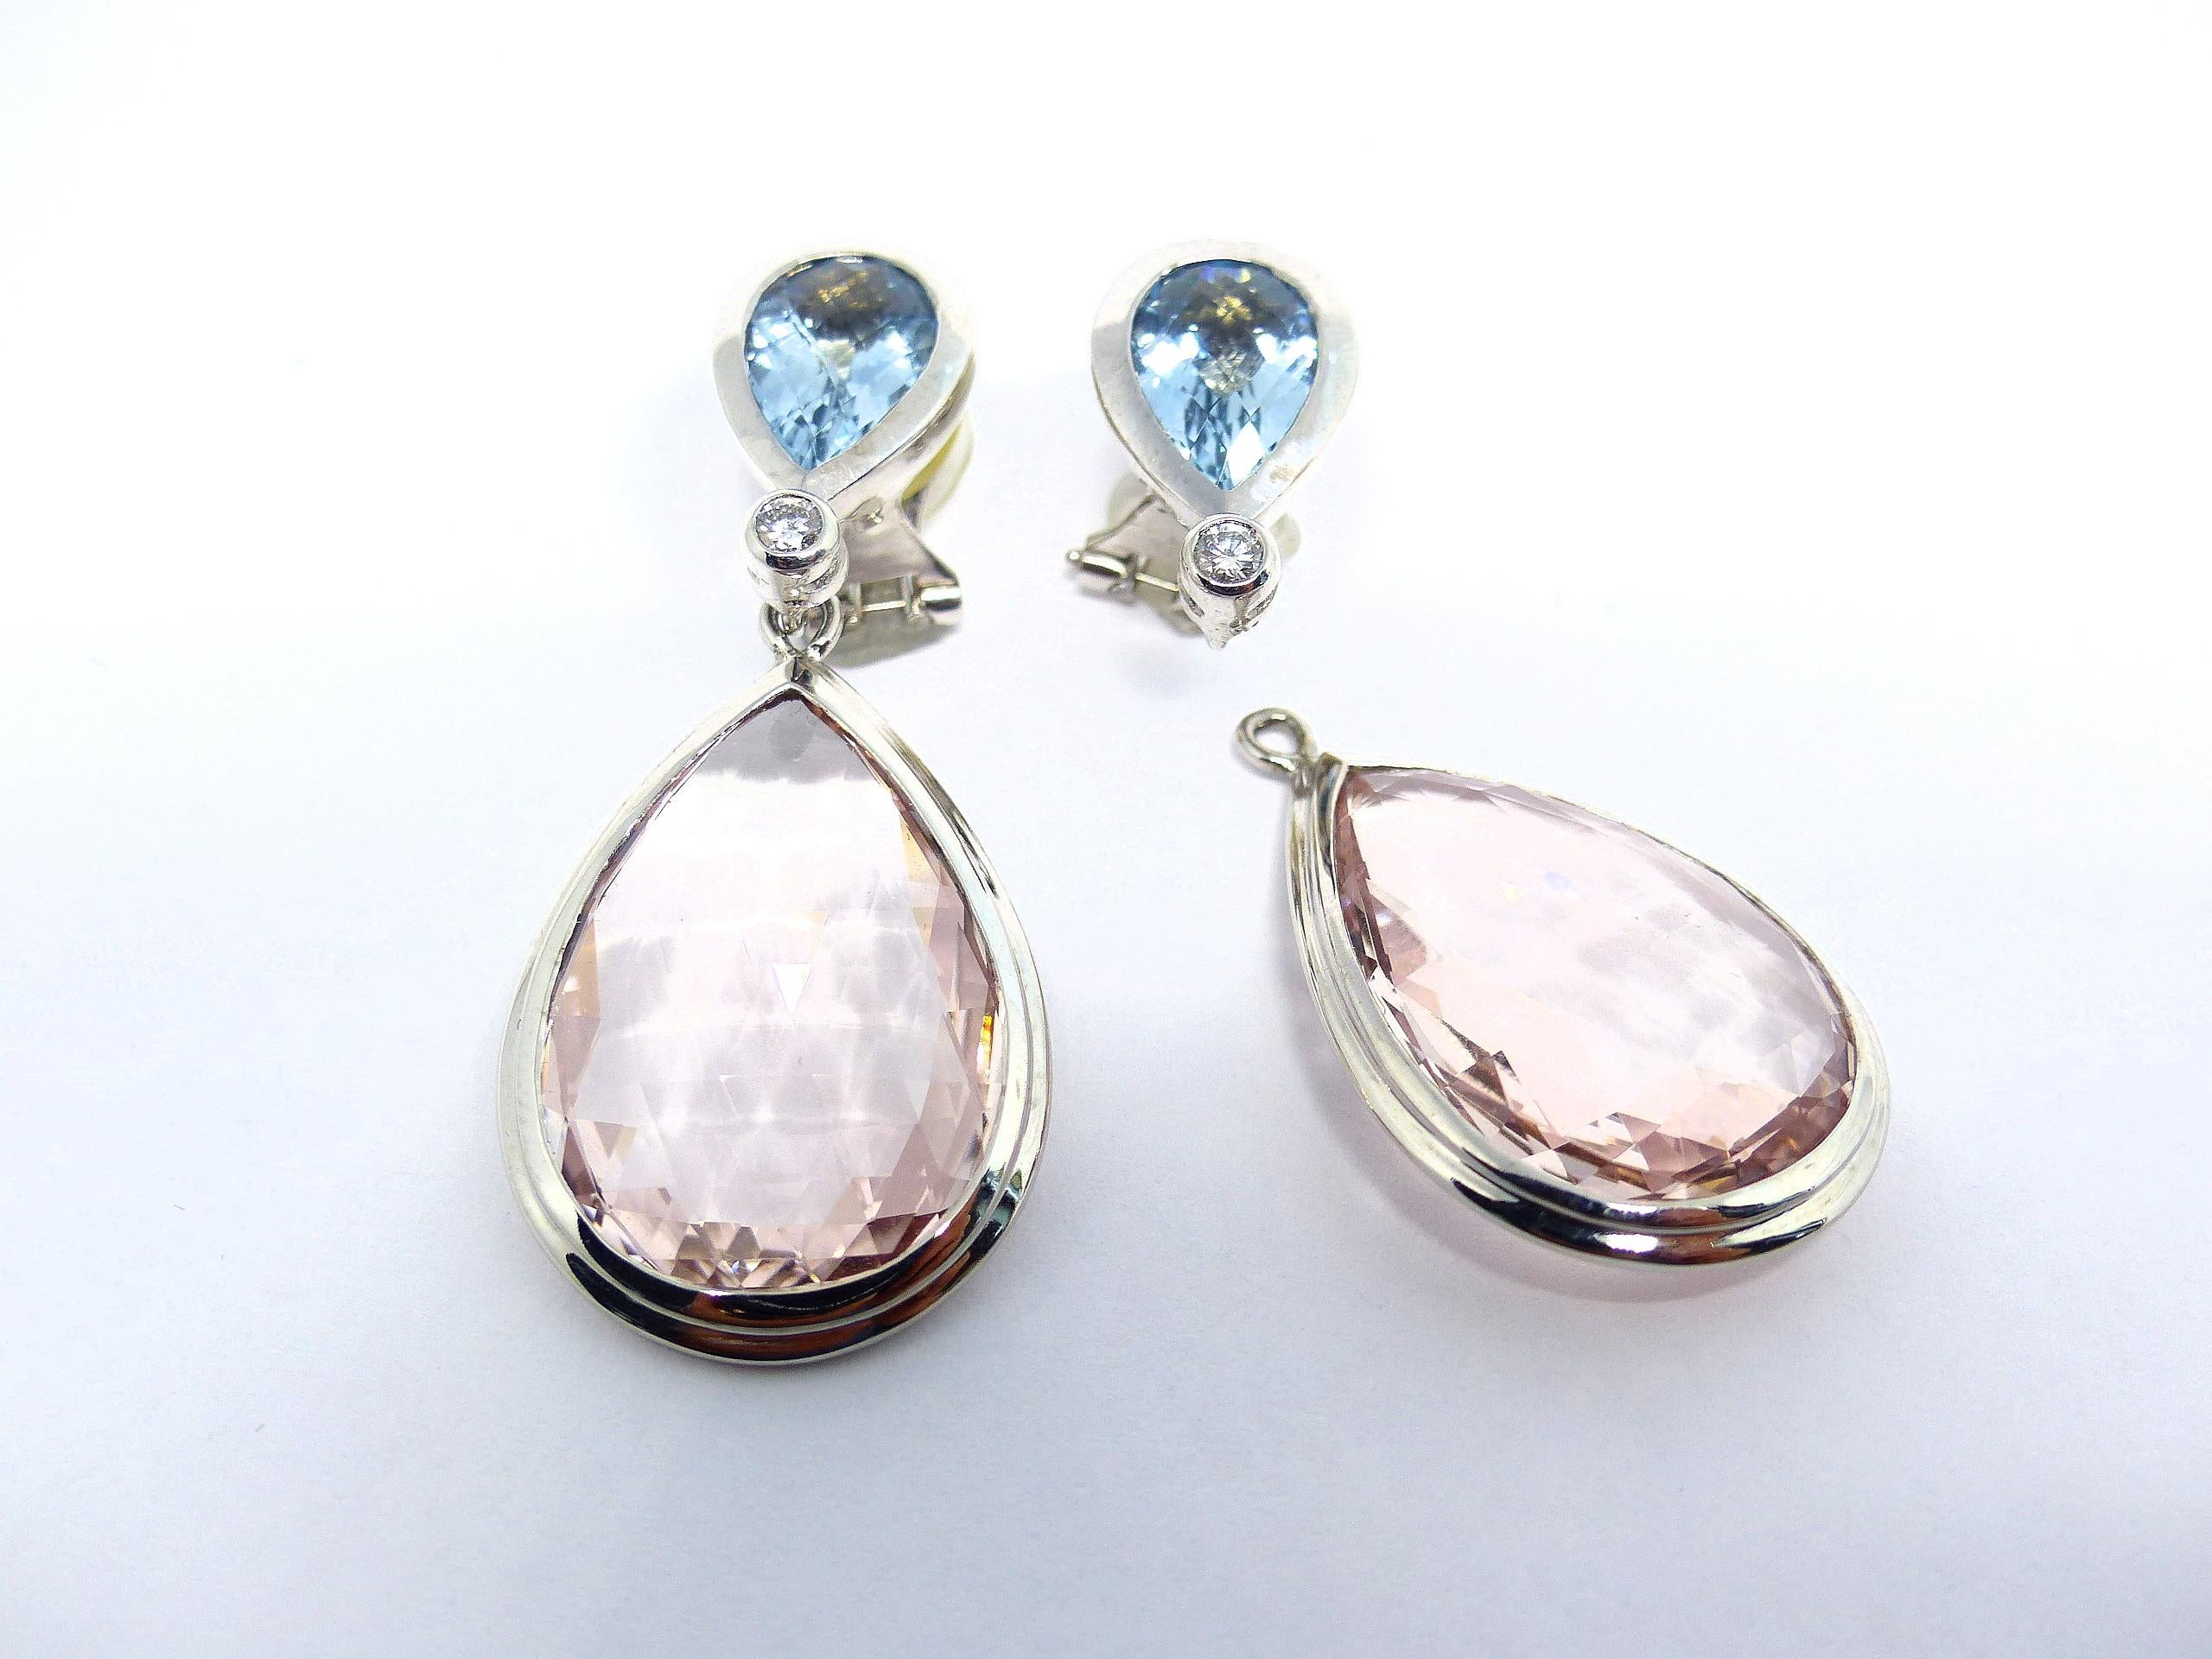 Contemporary Earrings in White Gold with Morganites Briolets, Aquamarines & Diamonds For Sale